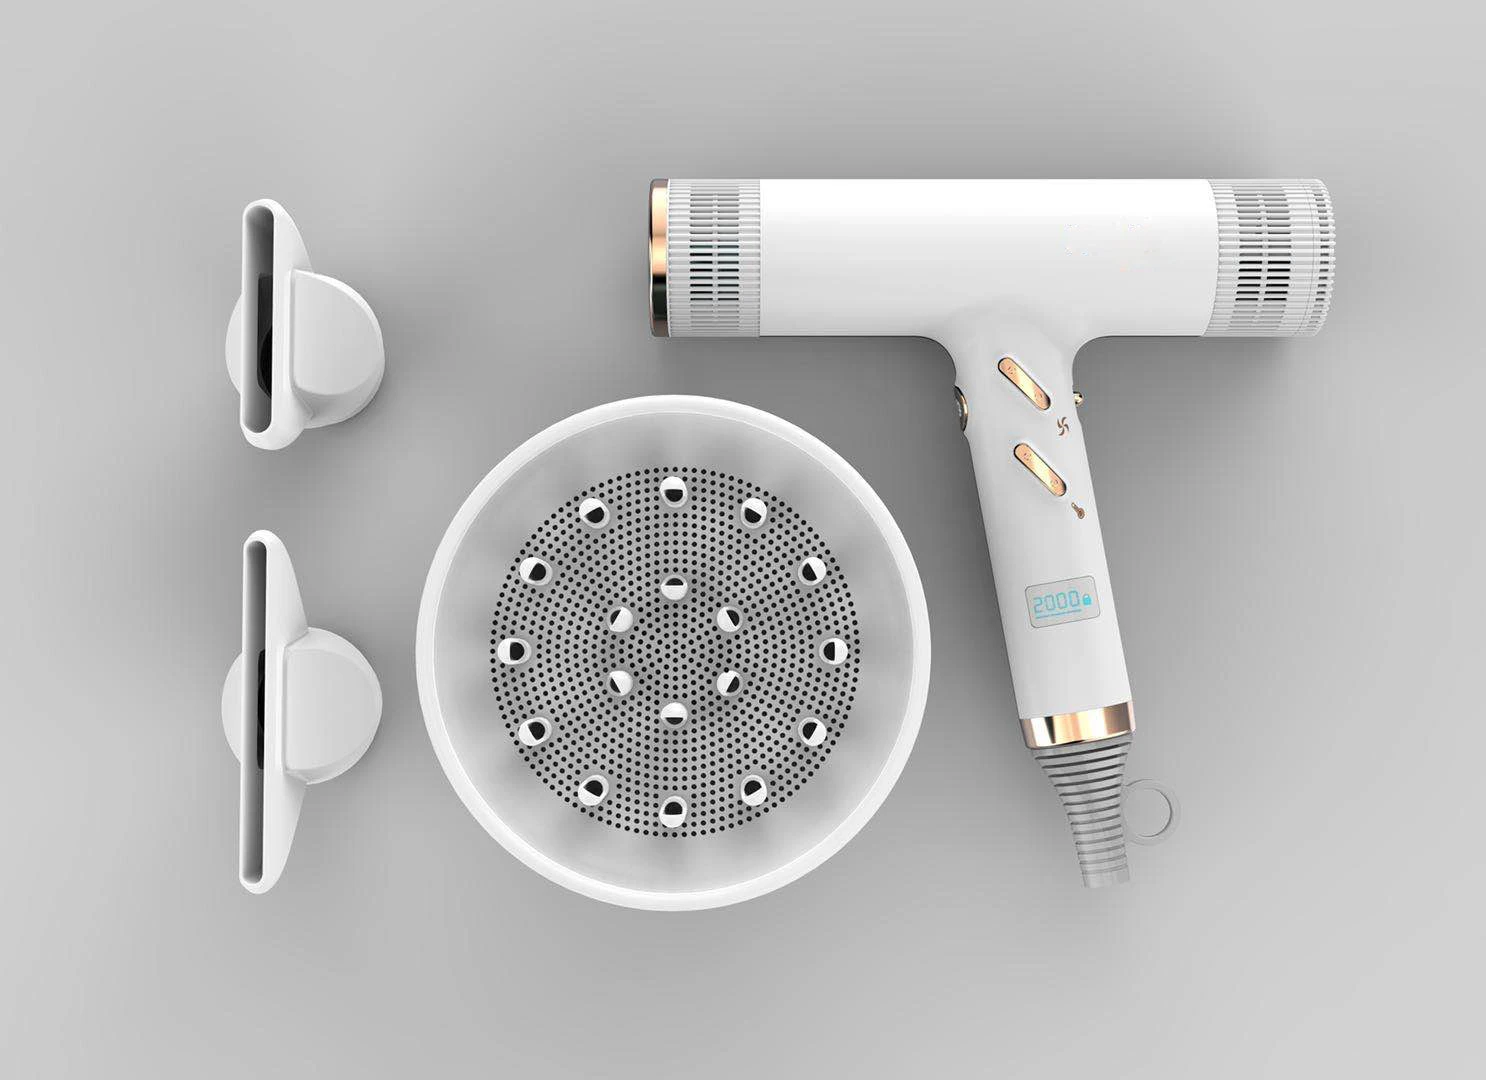 New type of high-quality, lightweight and ultra-quiet LCD leafless hair dryer for personal use